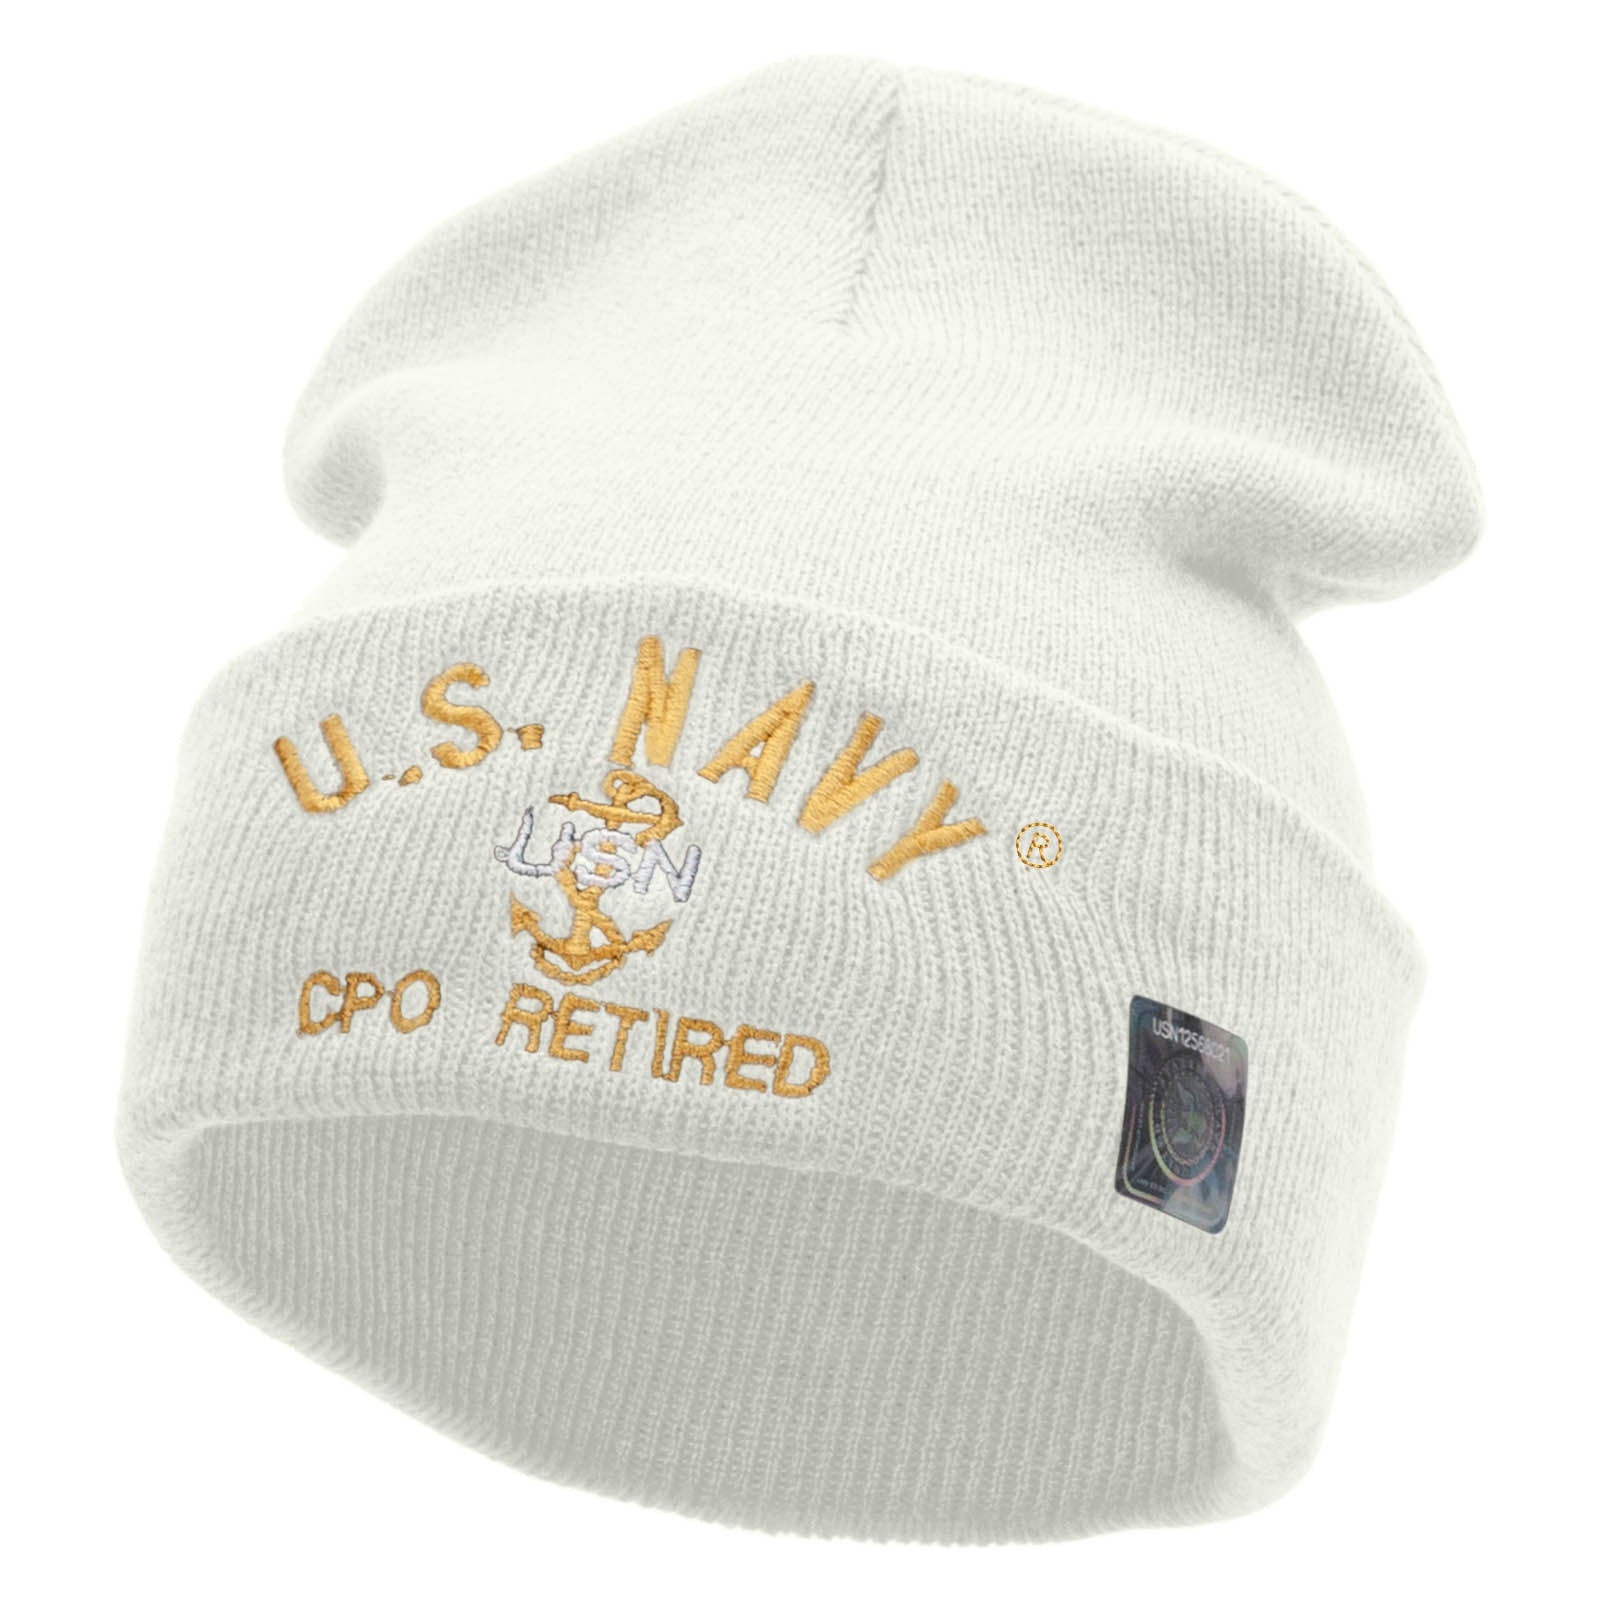 Licensed US Navy CPO Retired Logo Embroidered Long Beanie Made in USA - White OSFM